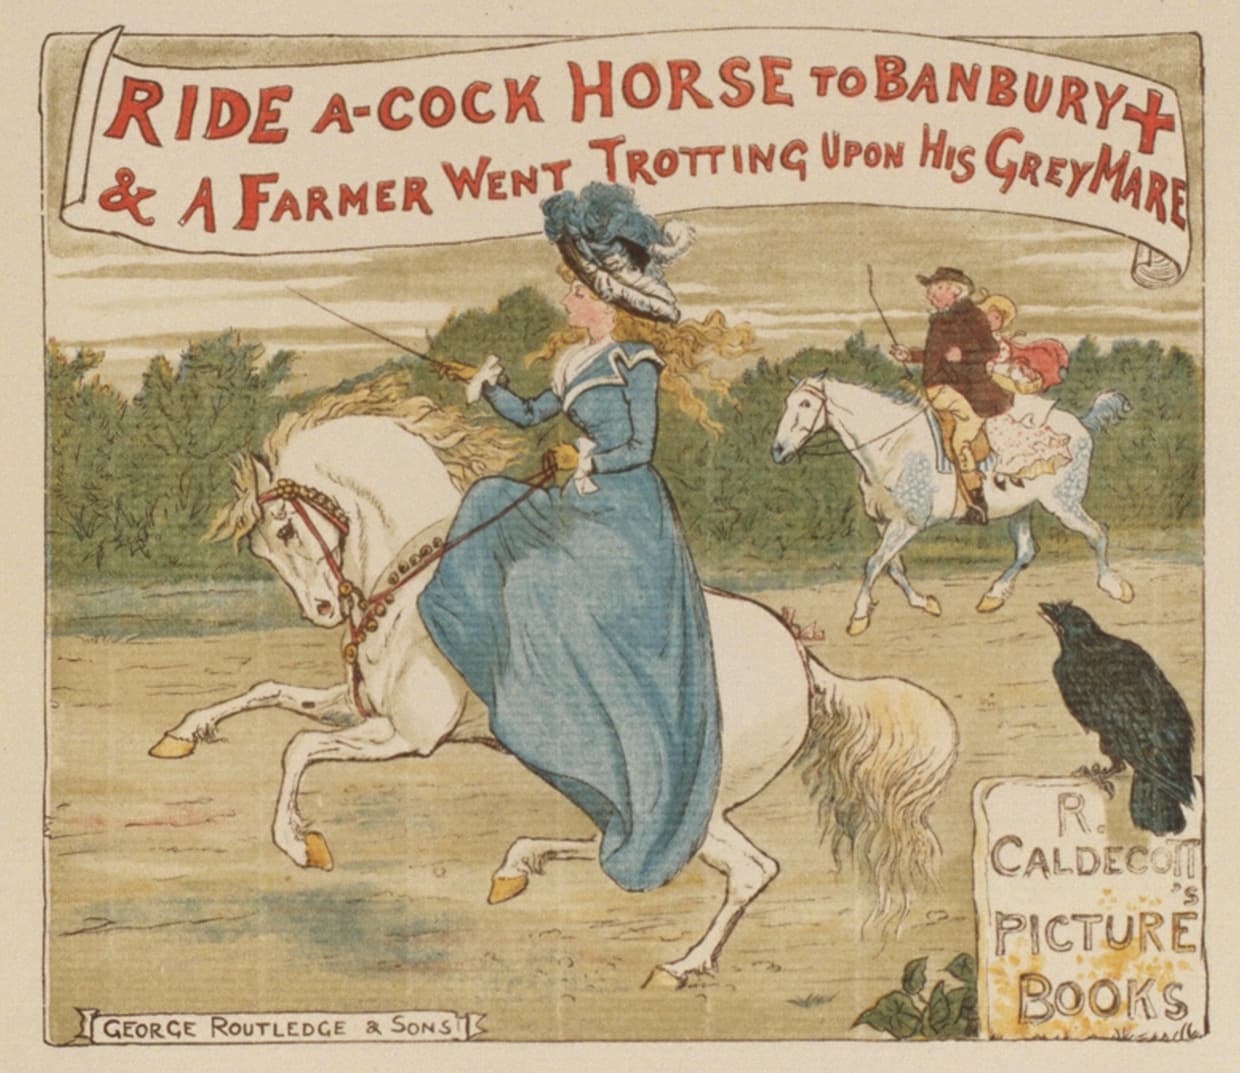 Front cover of Ride a Cock Horse to Banbury Cross & A Farmer Went Trotting Upon His Grey Mare (page 423 of The Complete Collection of PICTURES and SONGS)